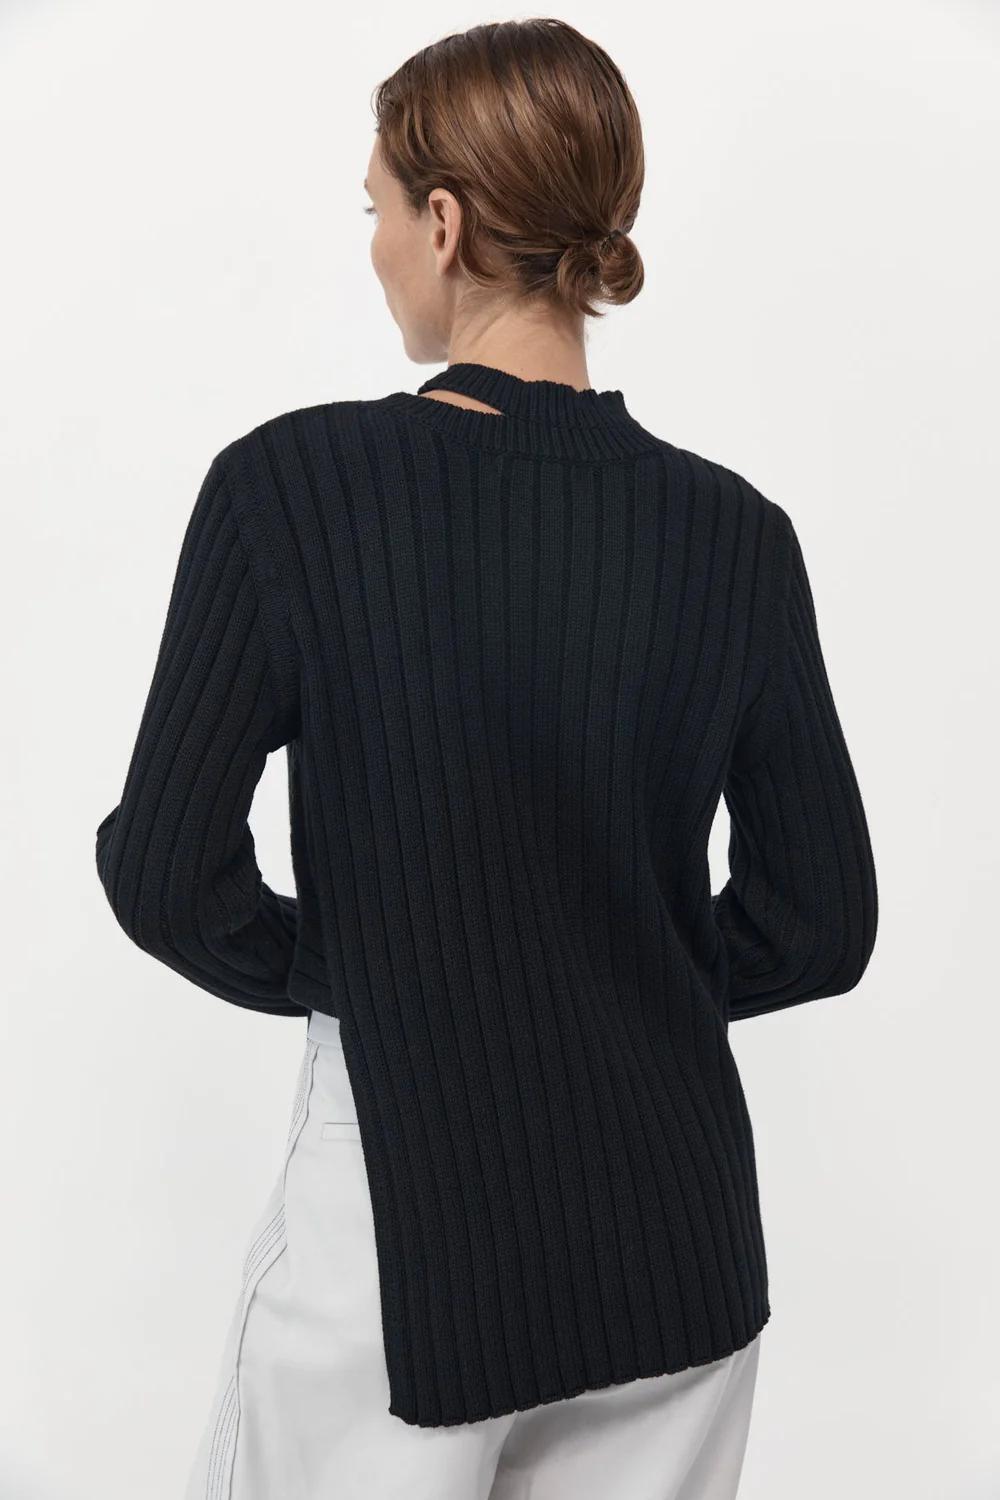 Product Image for Deconstructed Rib Knit Jumper, Black